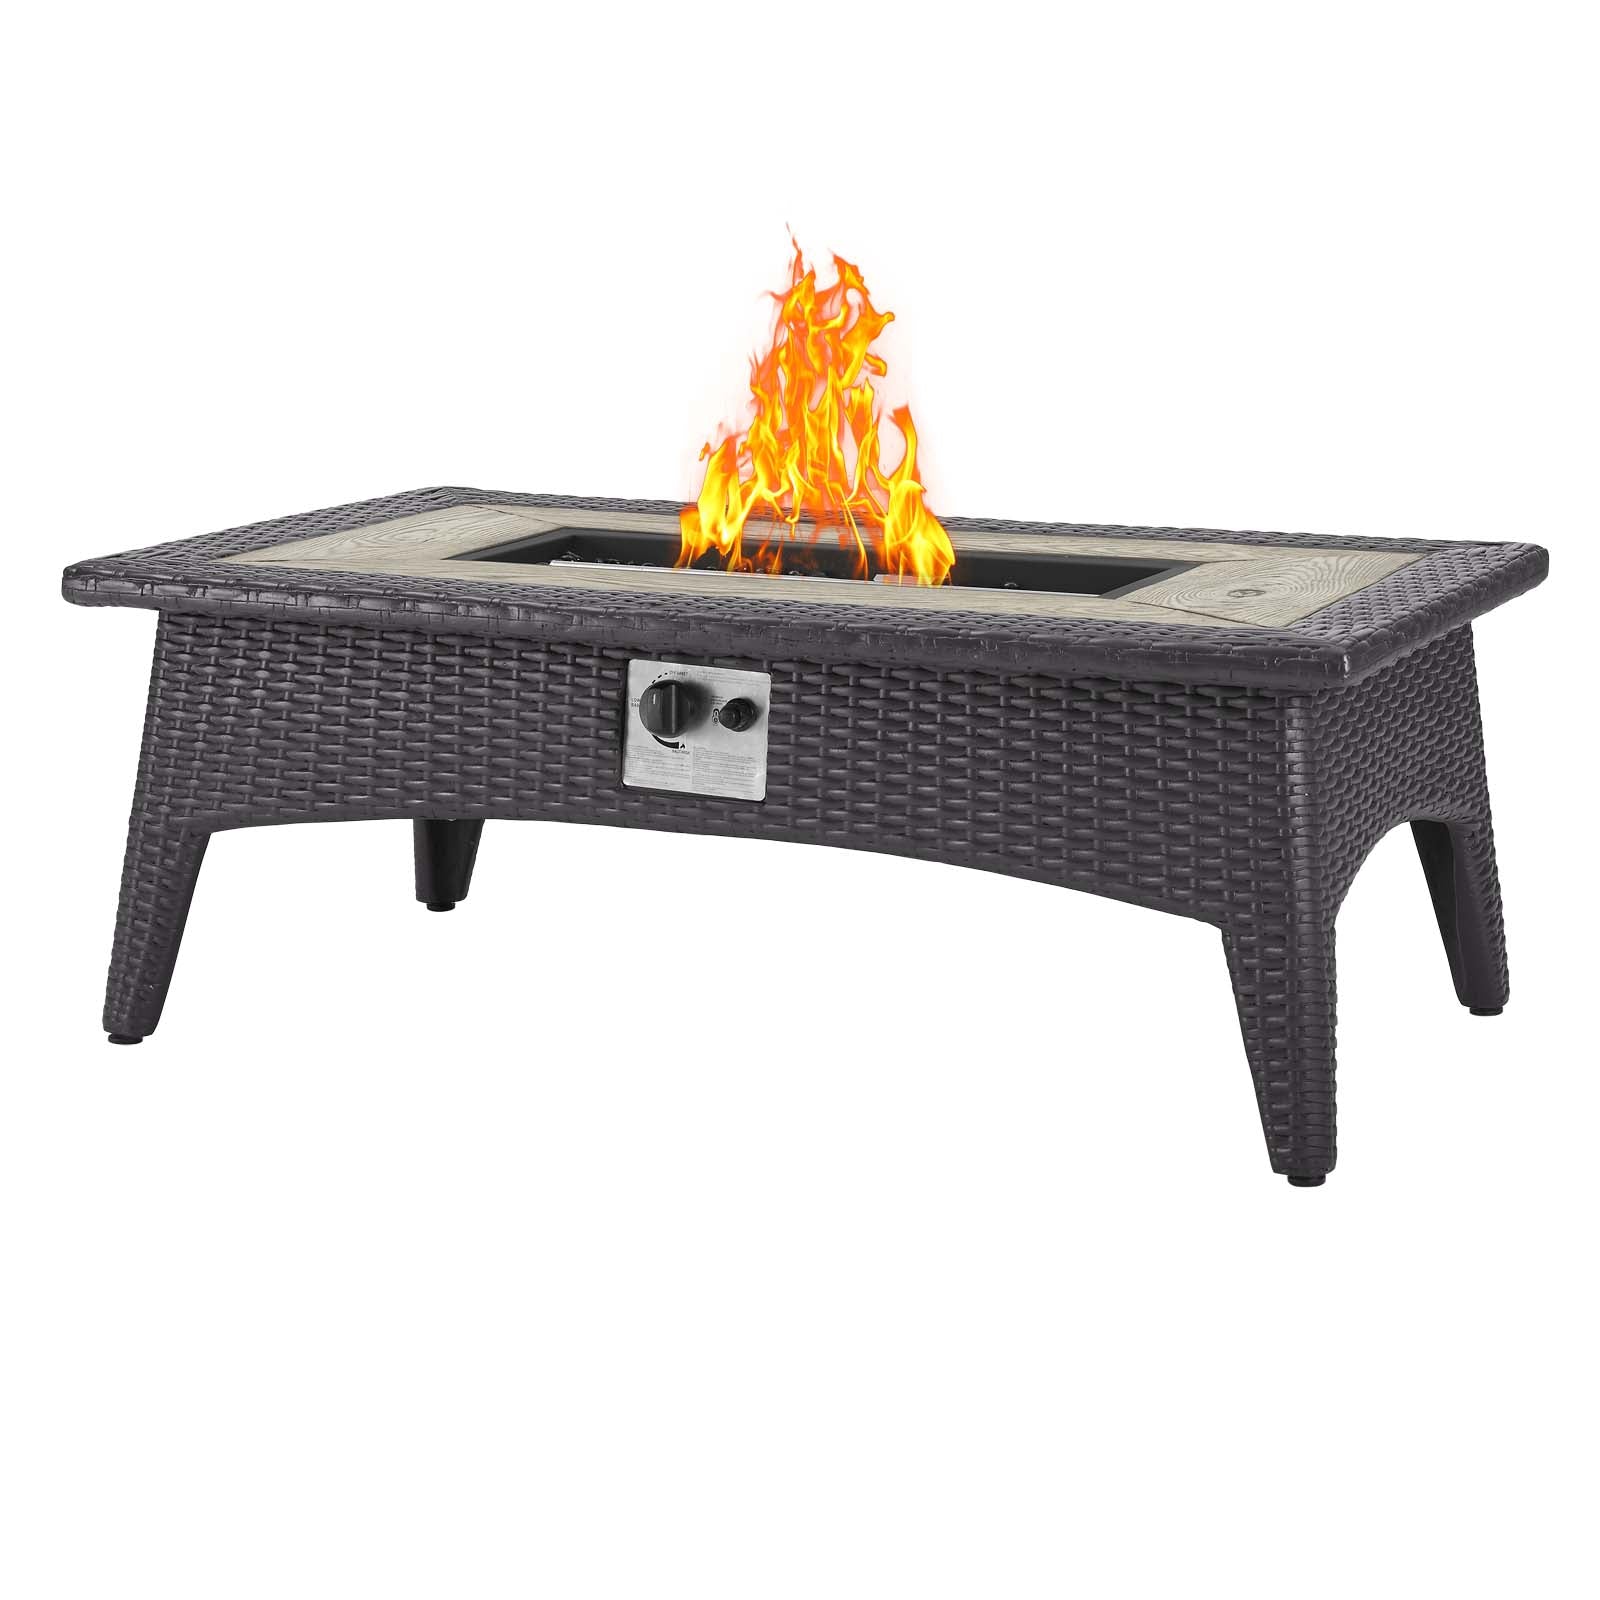 Splendor 43.5" Rectangle Outdoor Patio Fire Pit Table - East Shore Modern Home Furnishings